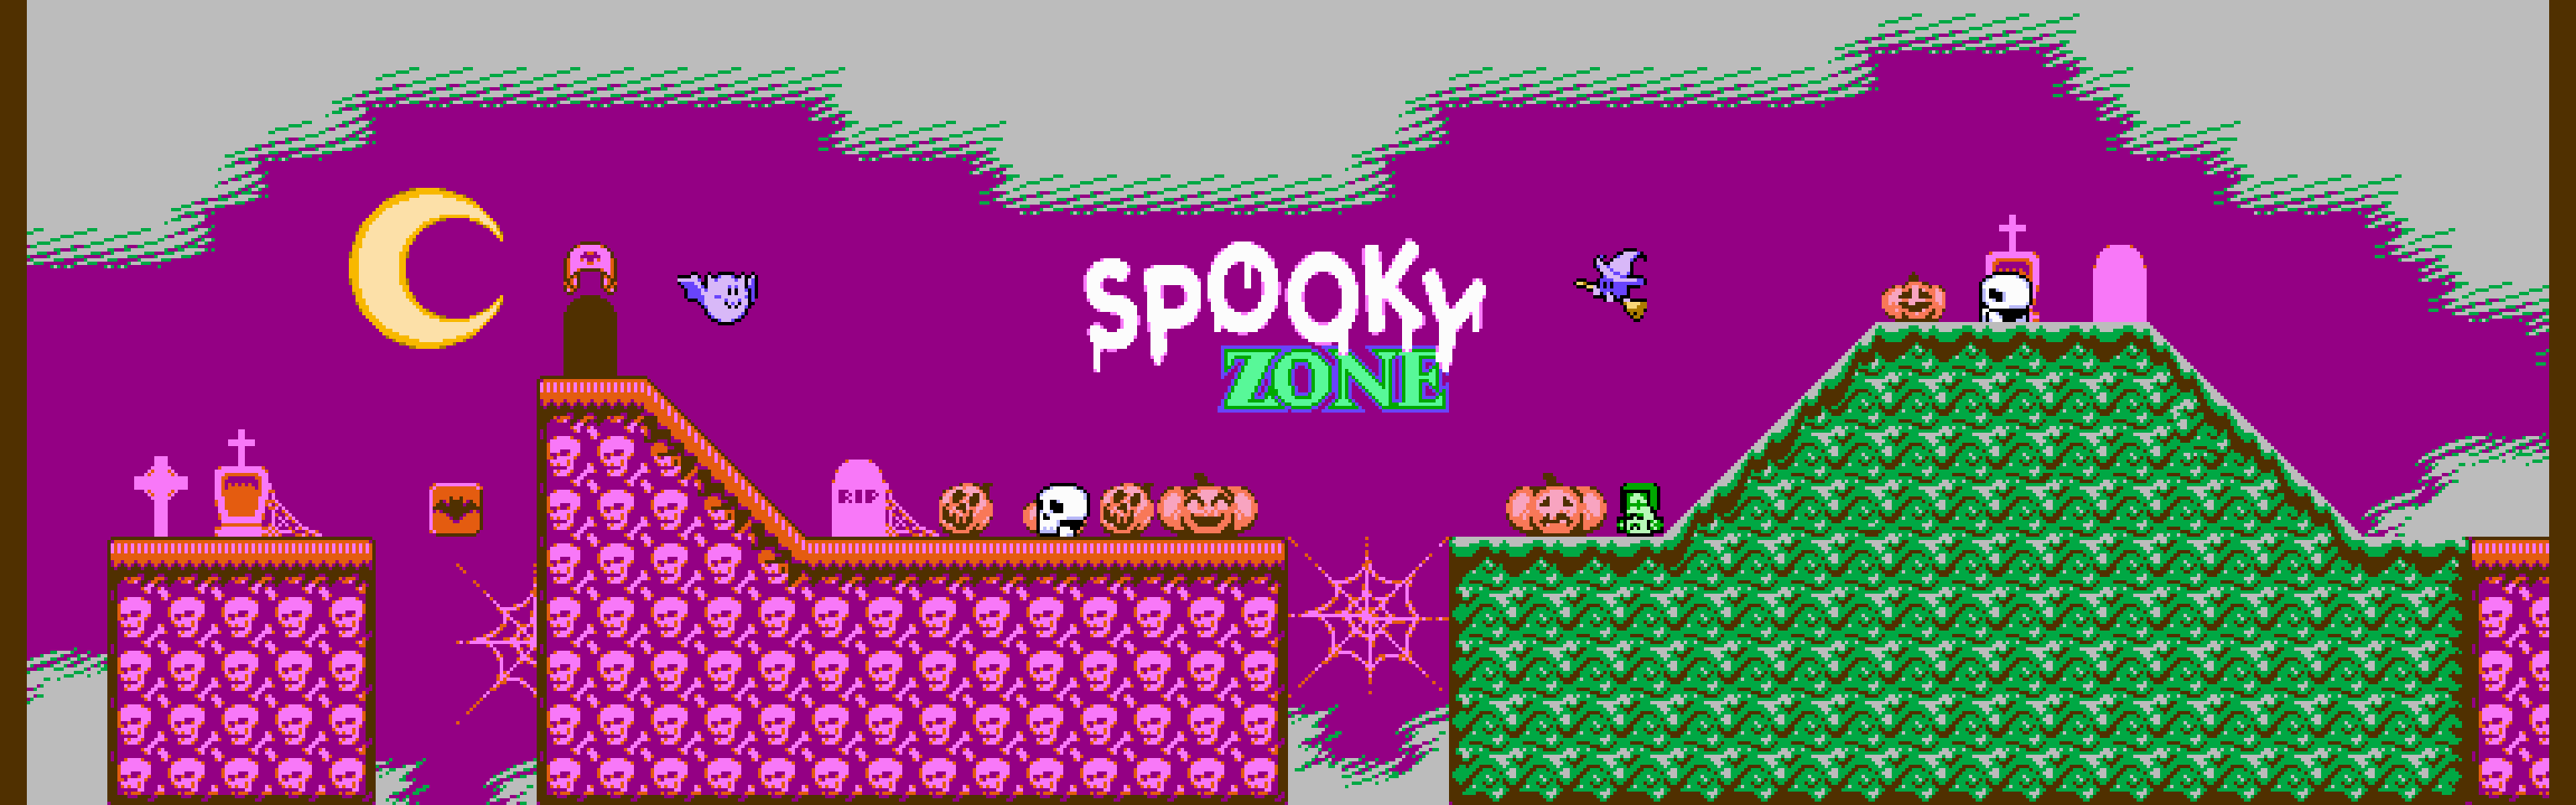 Spooky Zone Asset Pack